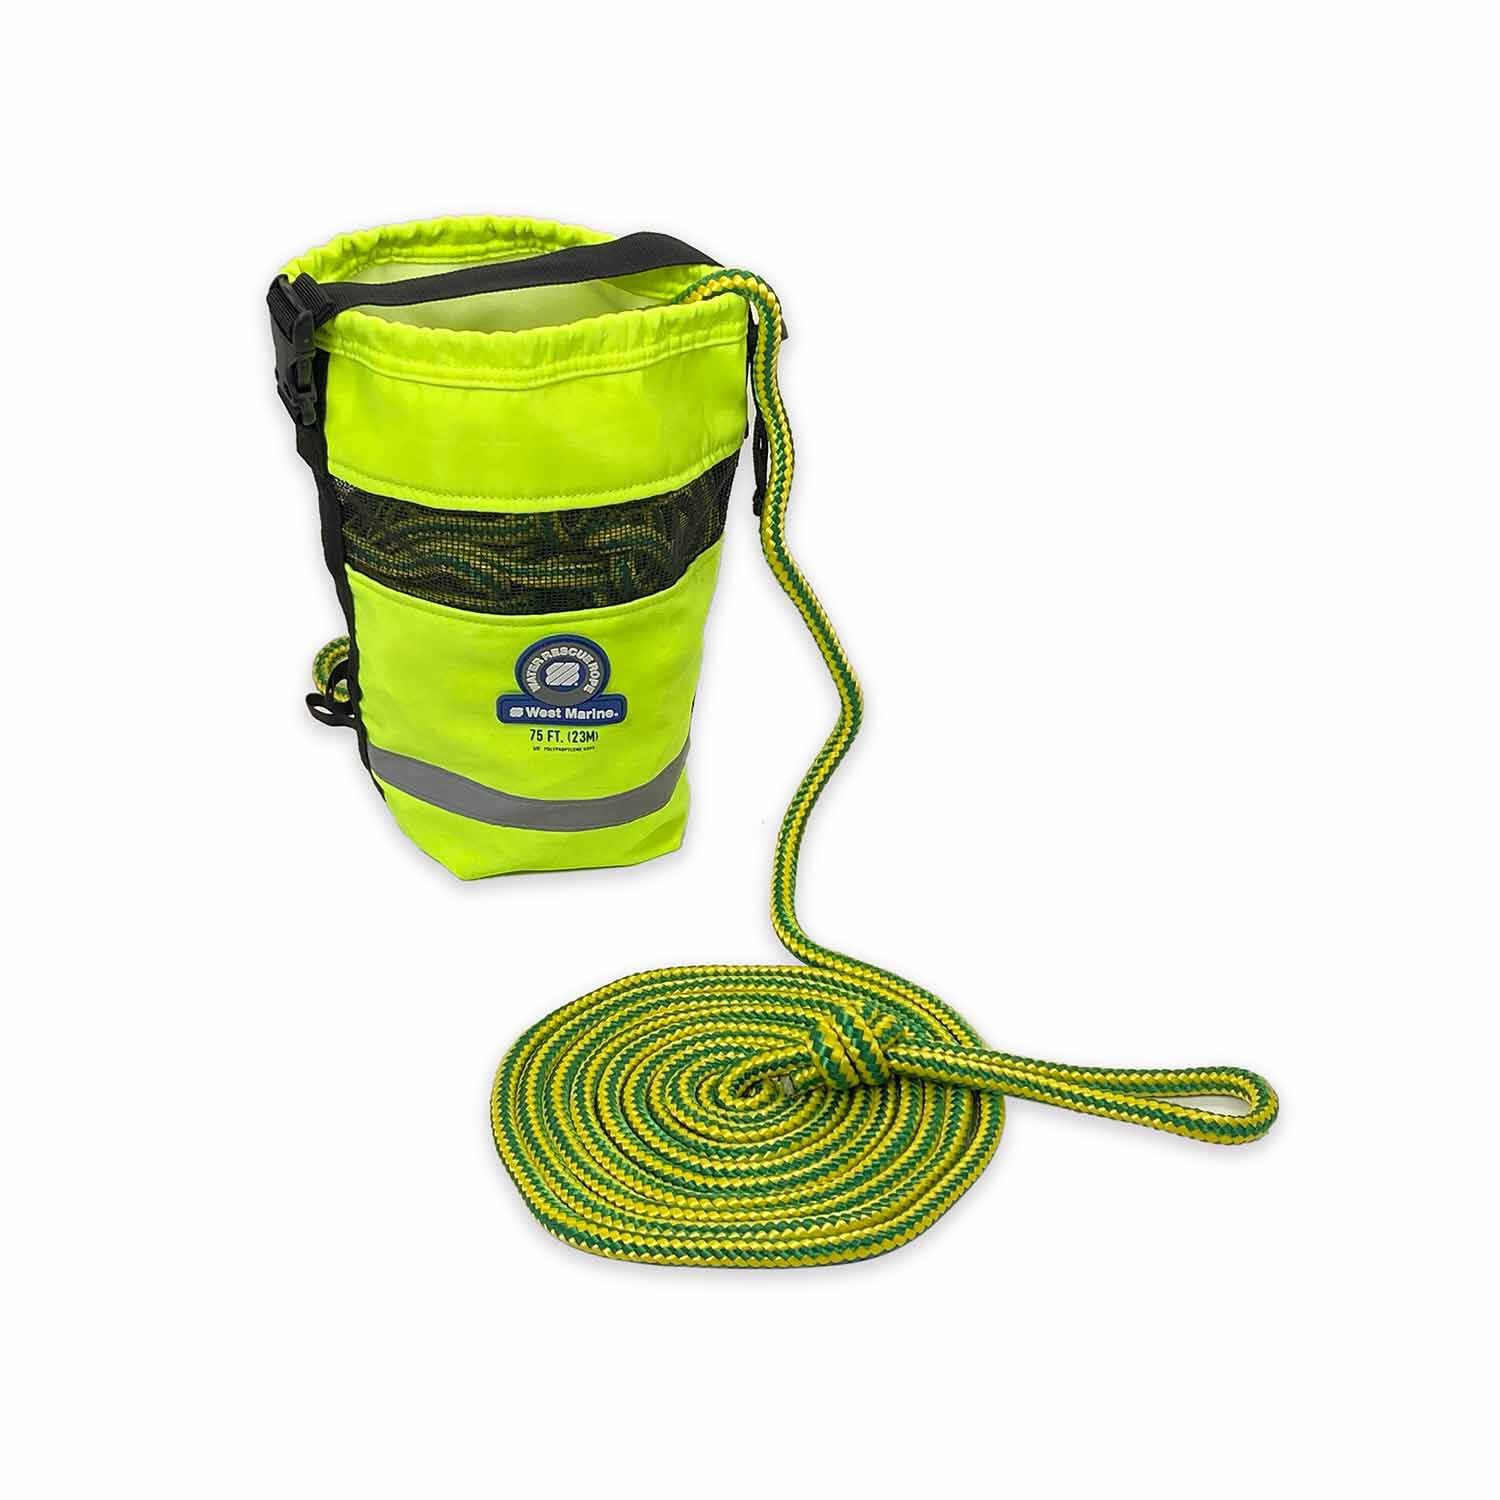 Ultralight weight Rock sack and throw line for PCT style bear bag hanging.